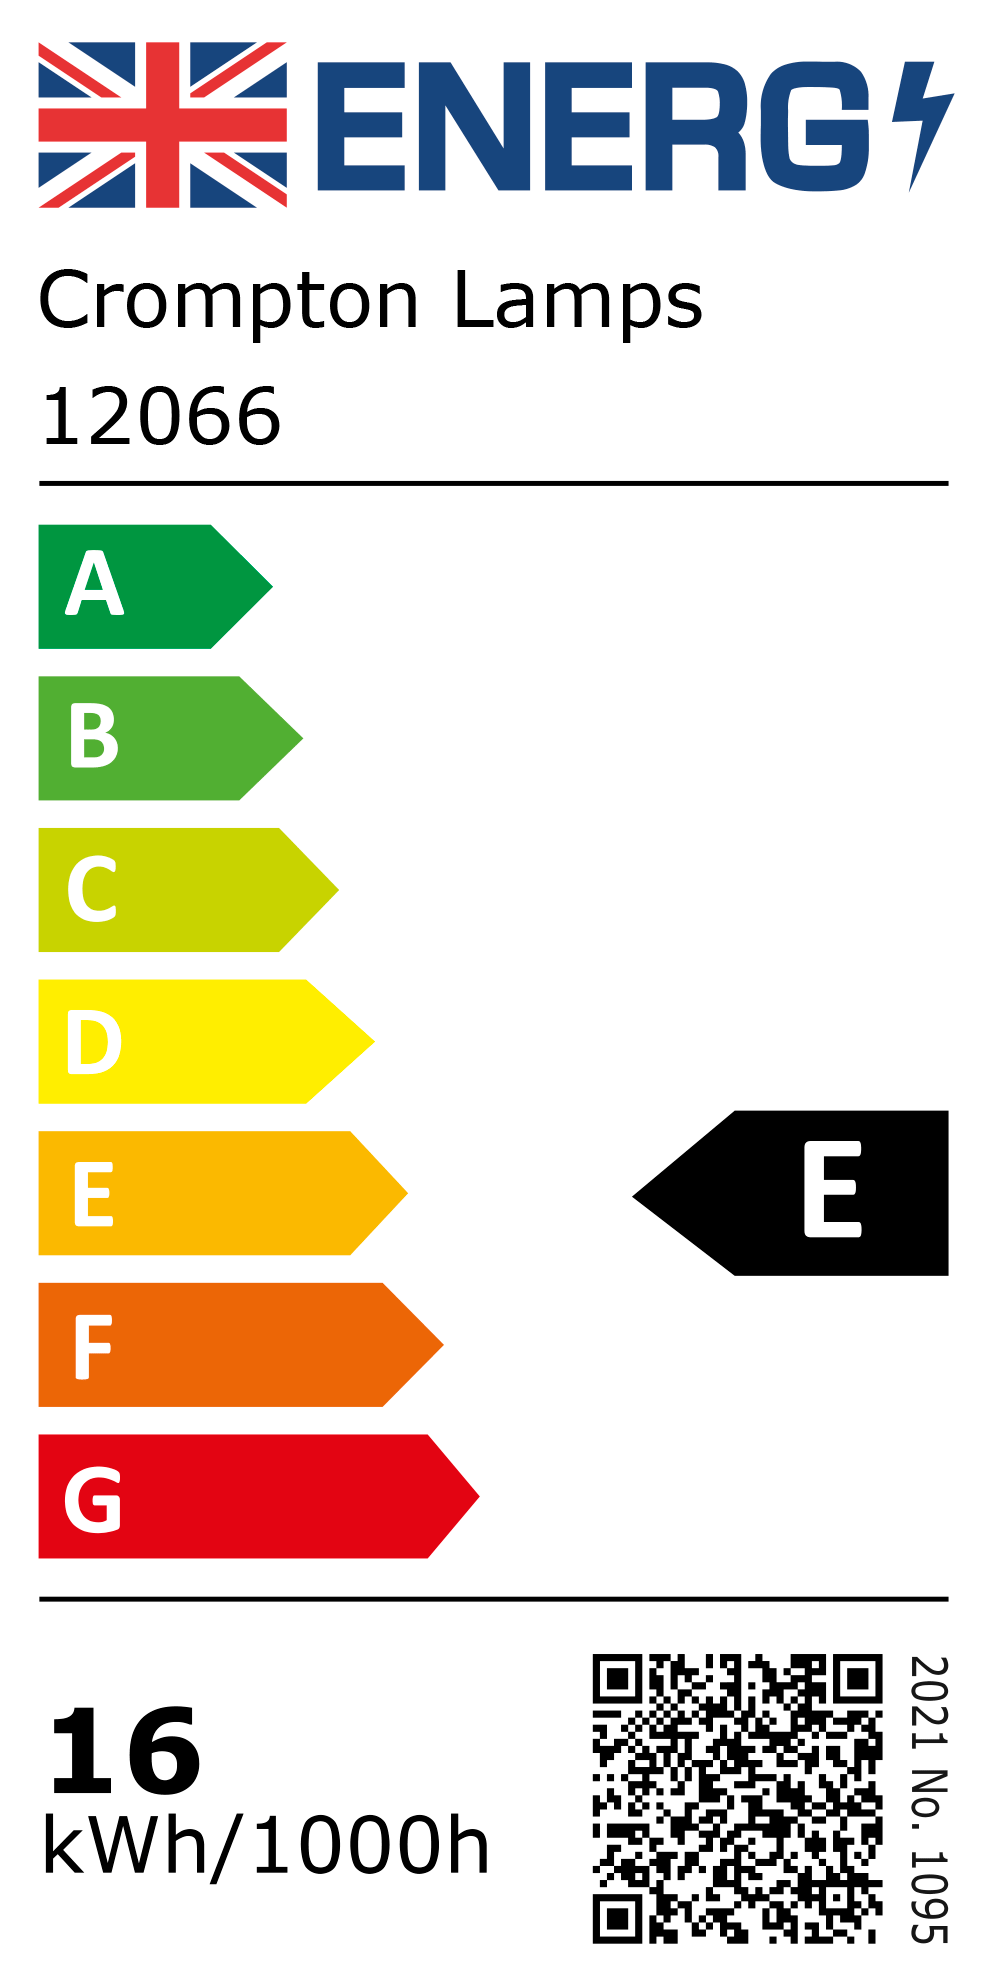 New 2021 Energy Rating Label: Stock Code 12066